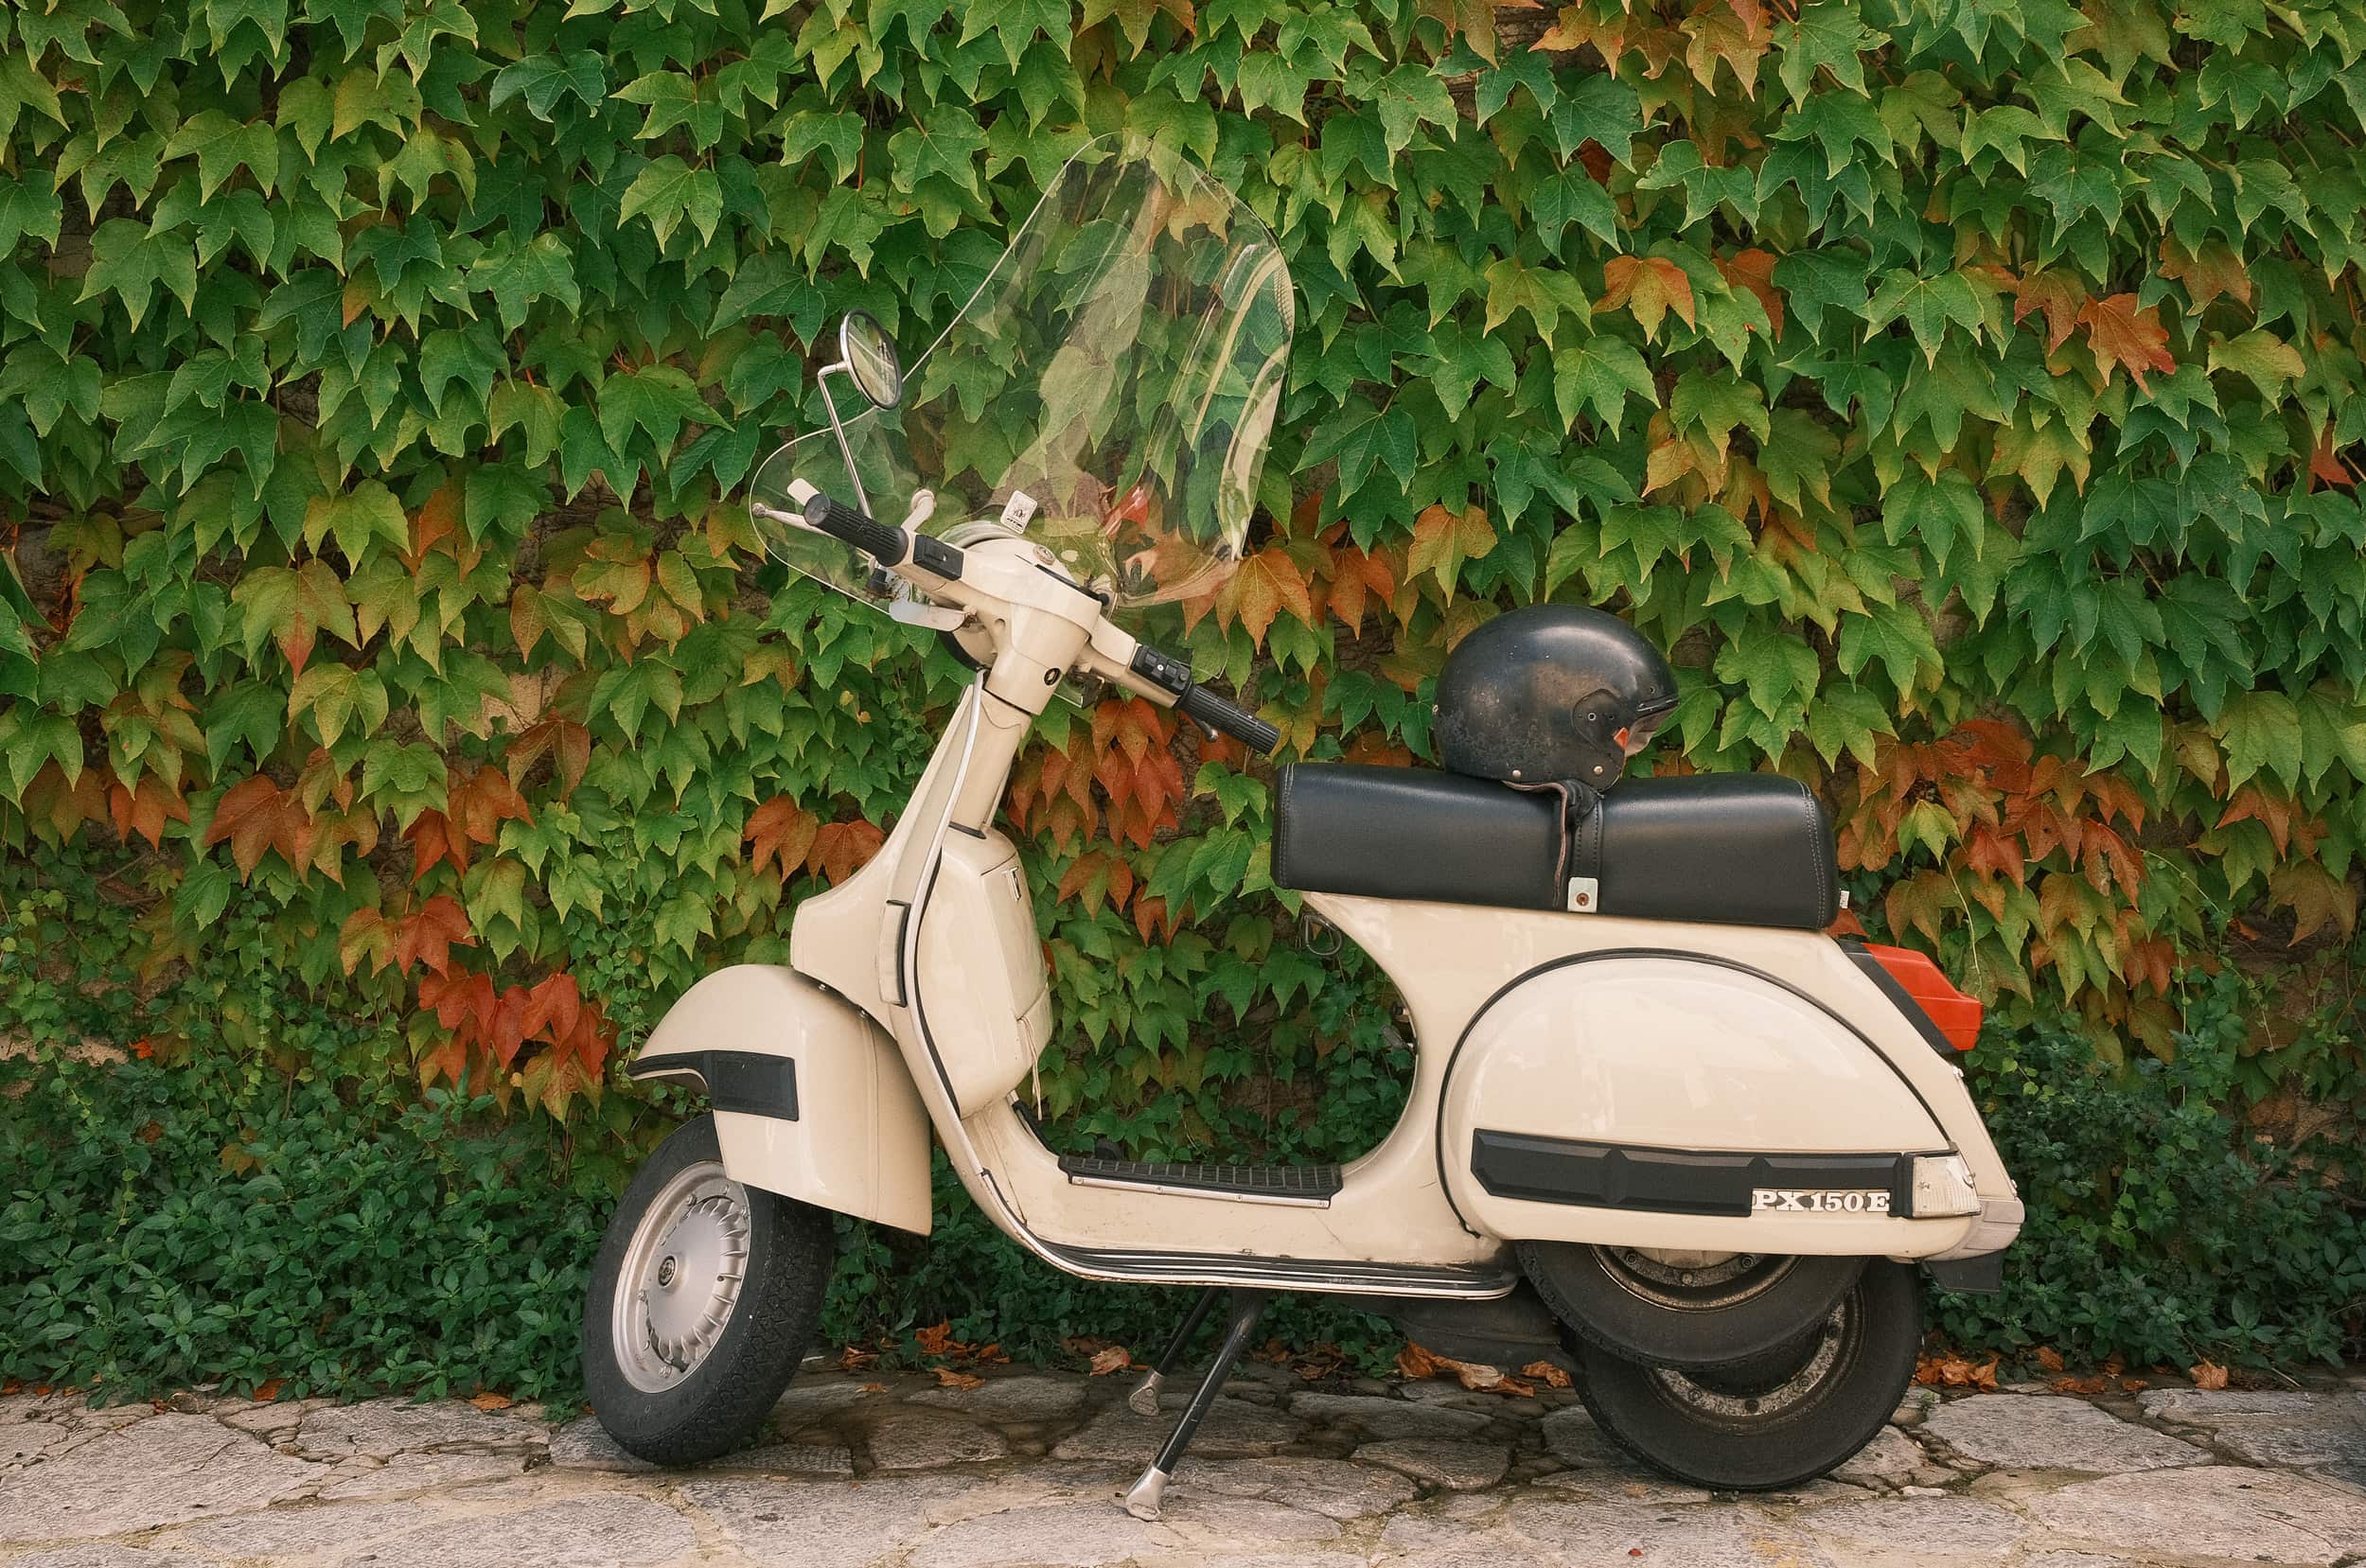 Cream coloured moped set against green and red leaf creeper